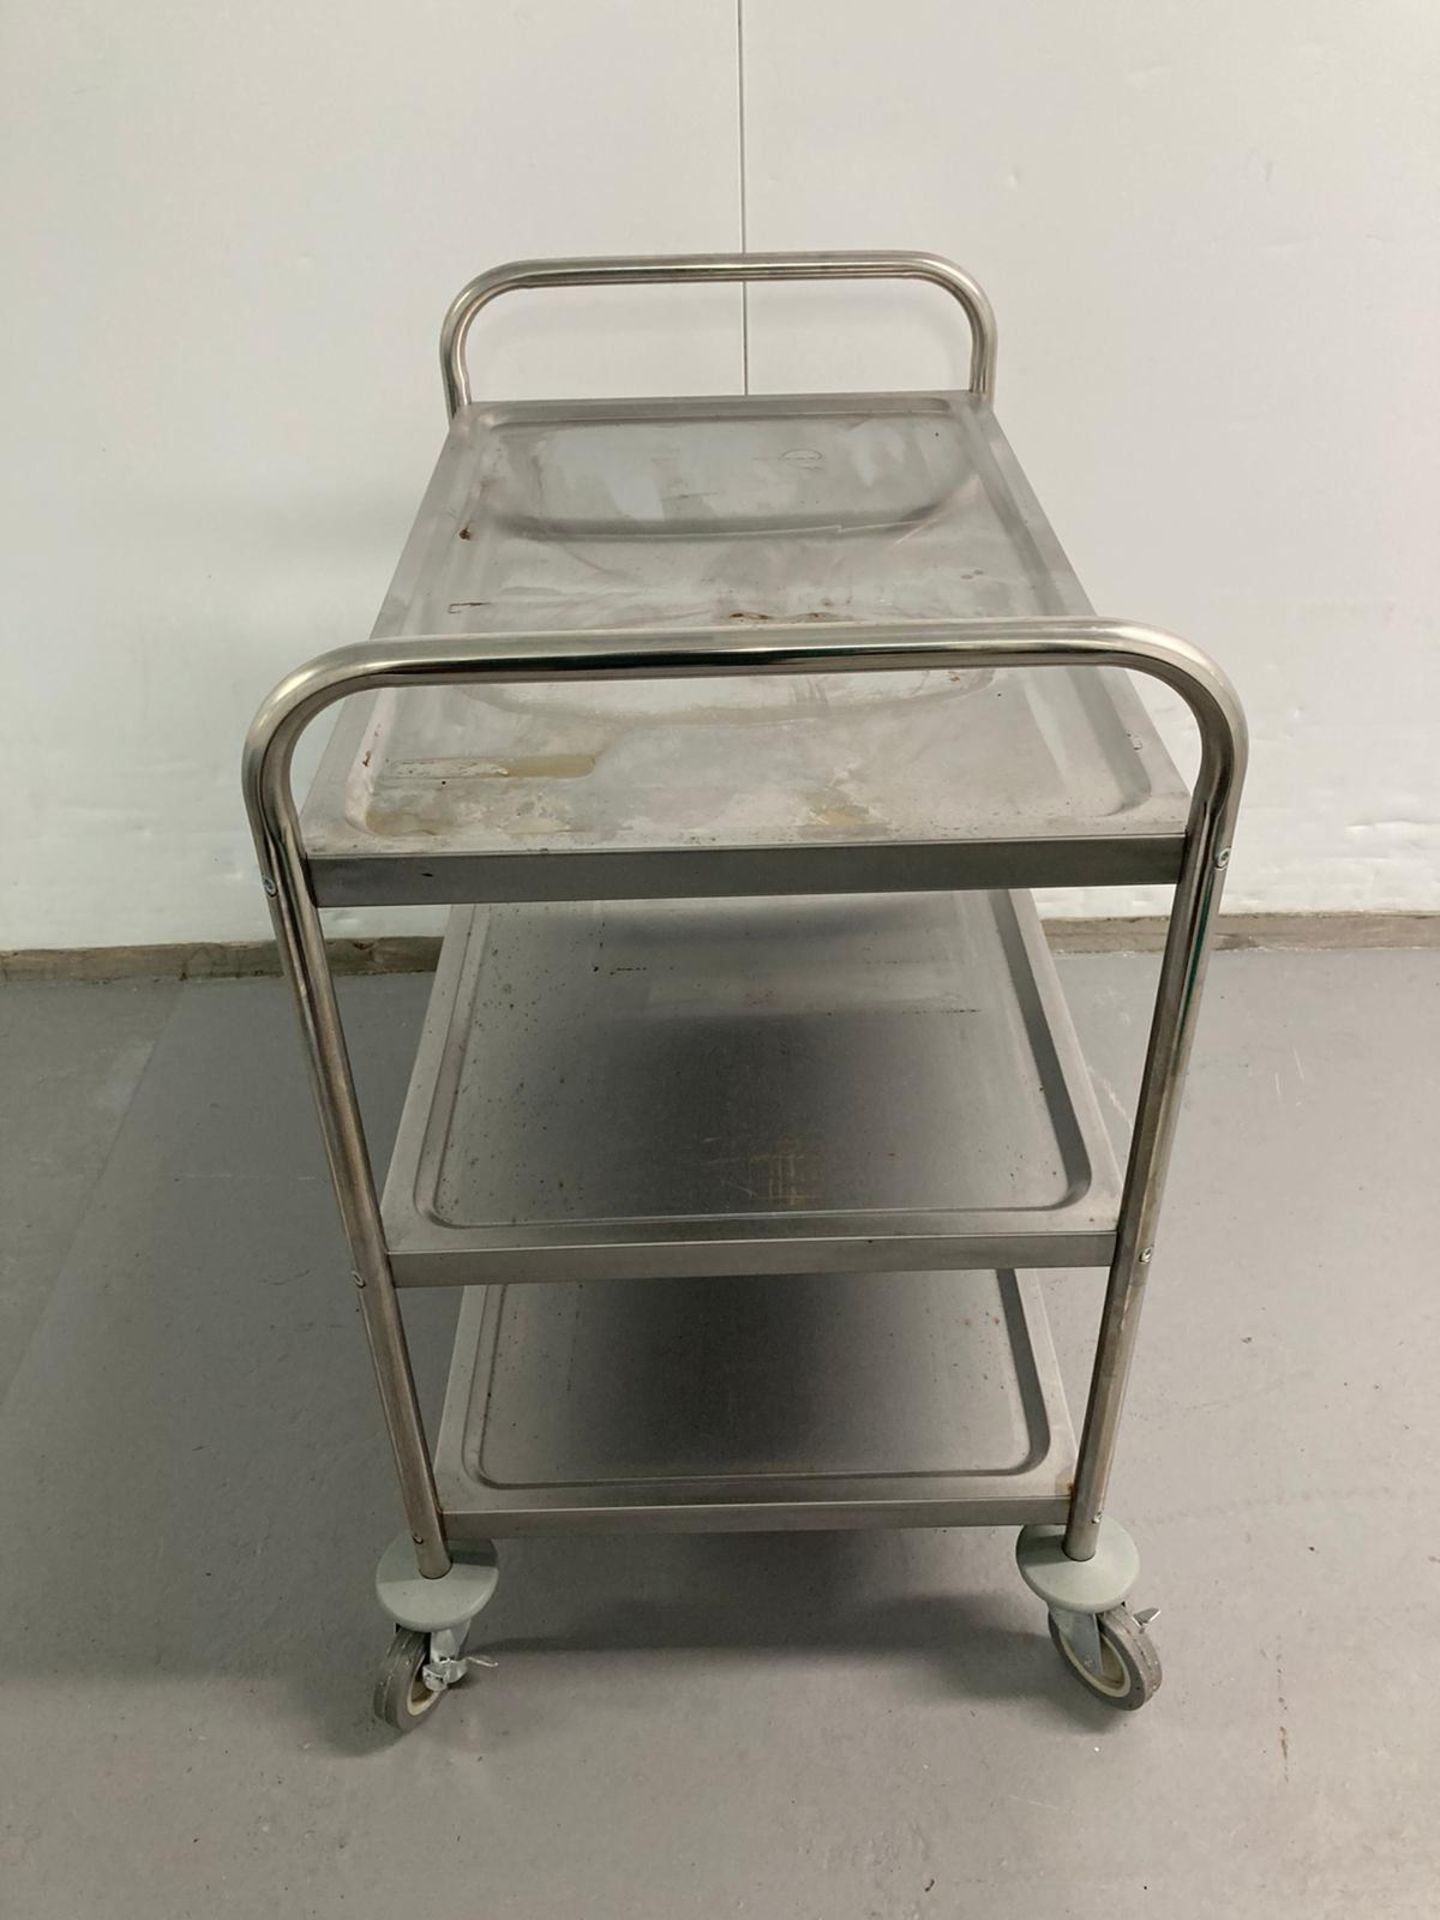 Vogue Stainless Steel Trolley - Image 2 of 5